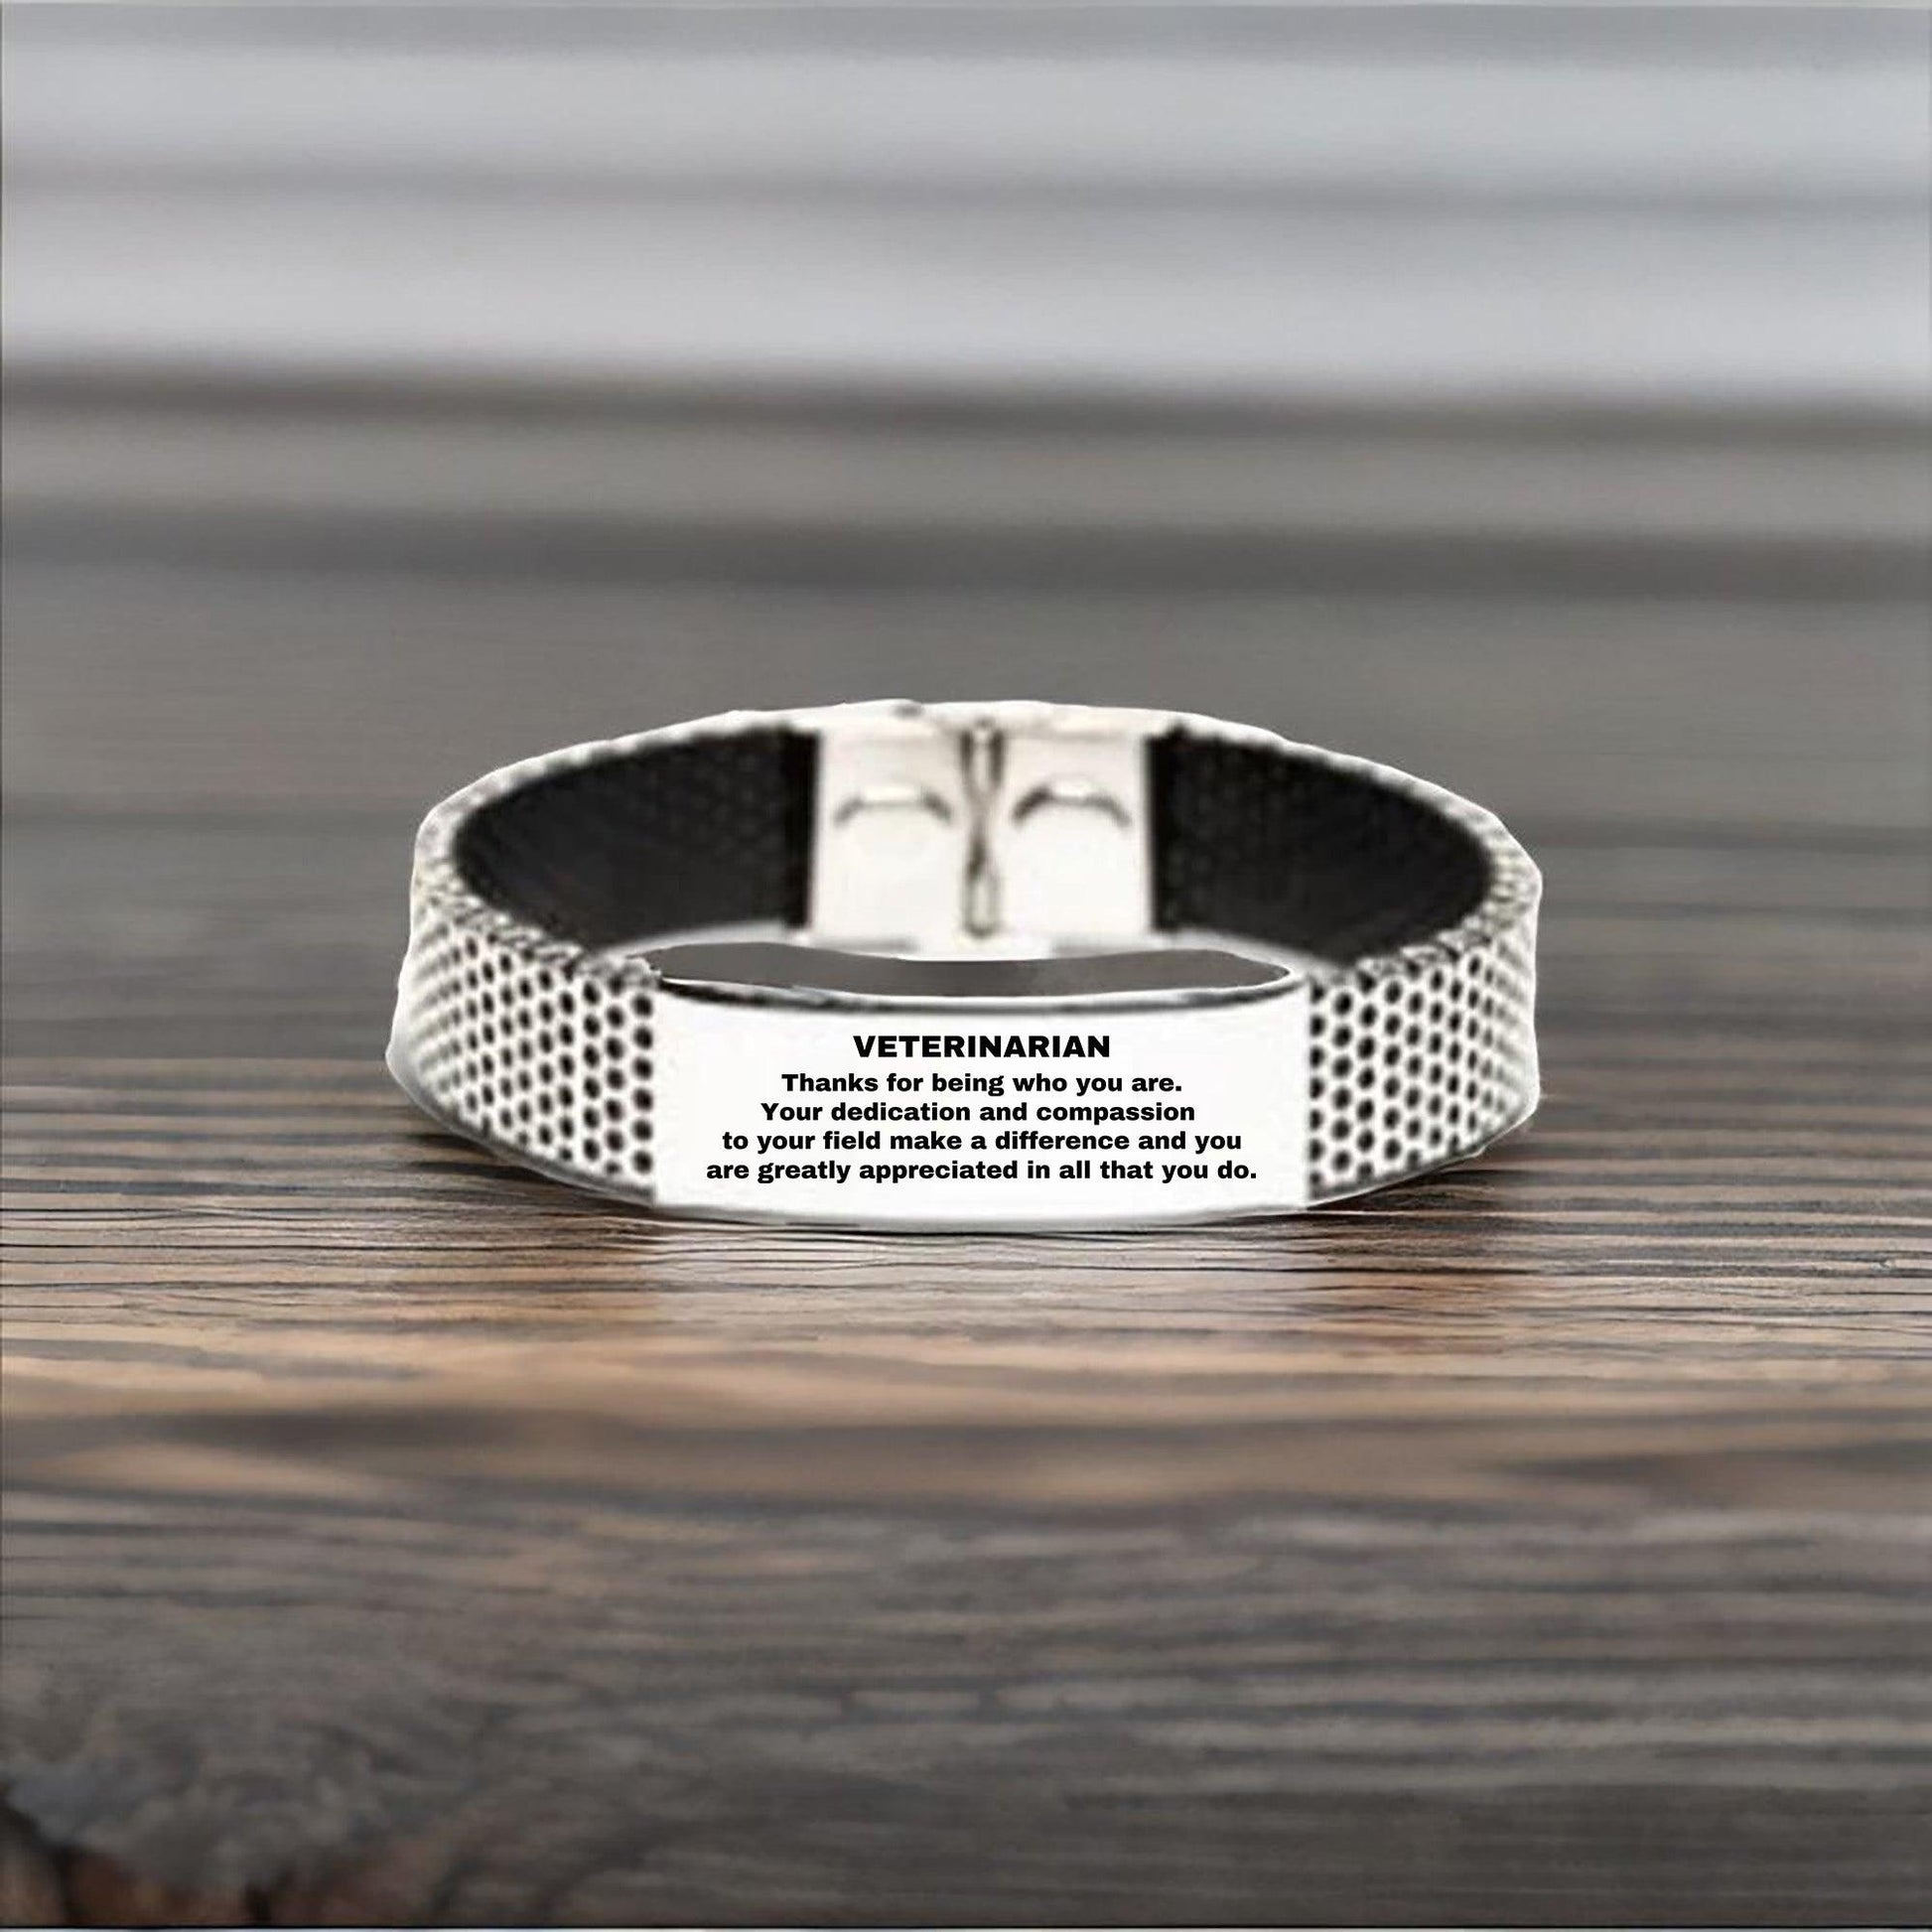 Veterinarian Silver Shark Mesh Stainless Steel Engraved Bracelet - Thanks for being who you are - Birthday Christmas Jewelry Gifts Coworkers Colleague Boss - Mallard Moon Gift Shop